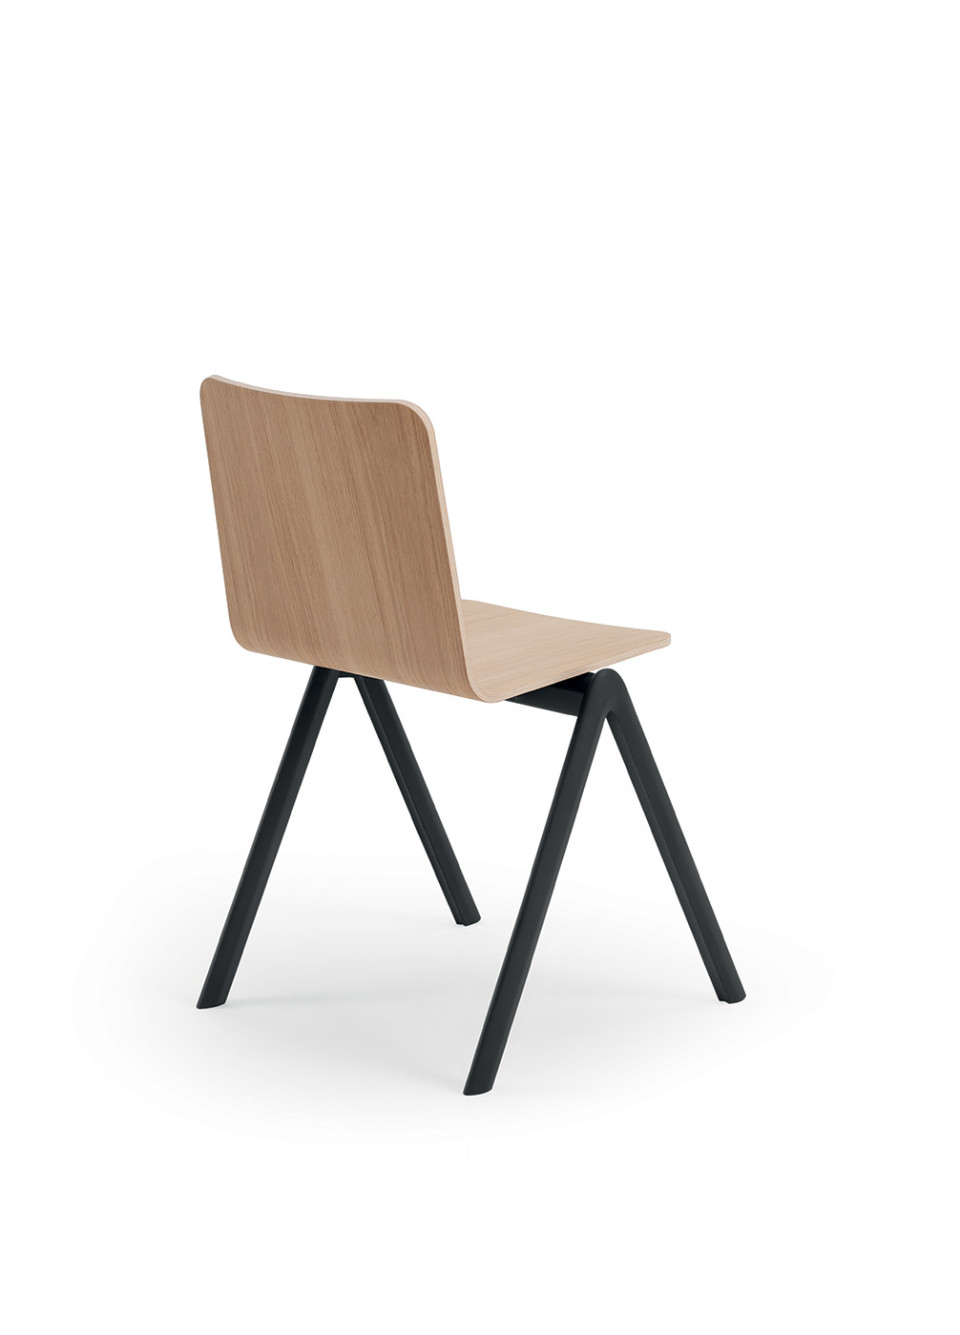 Stack chair with wooden seat